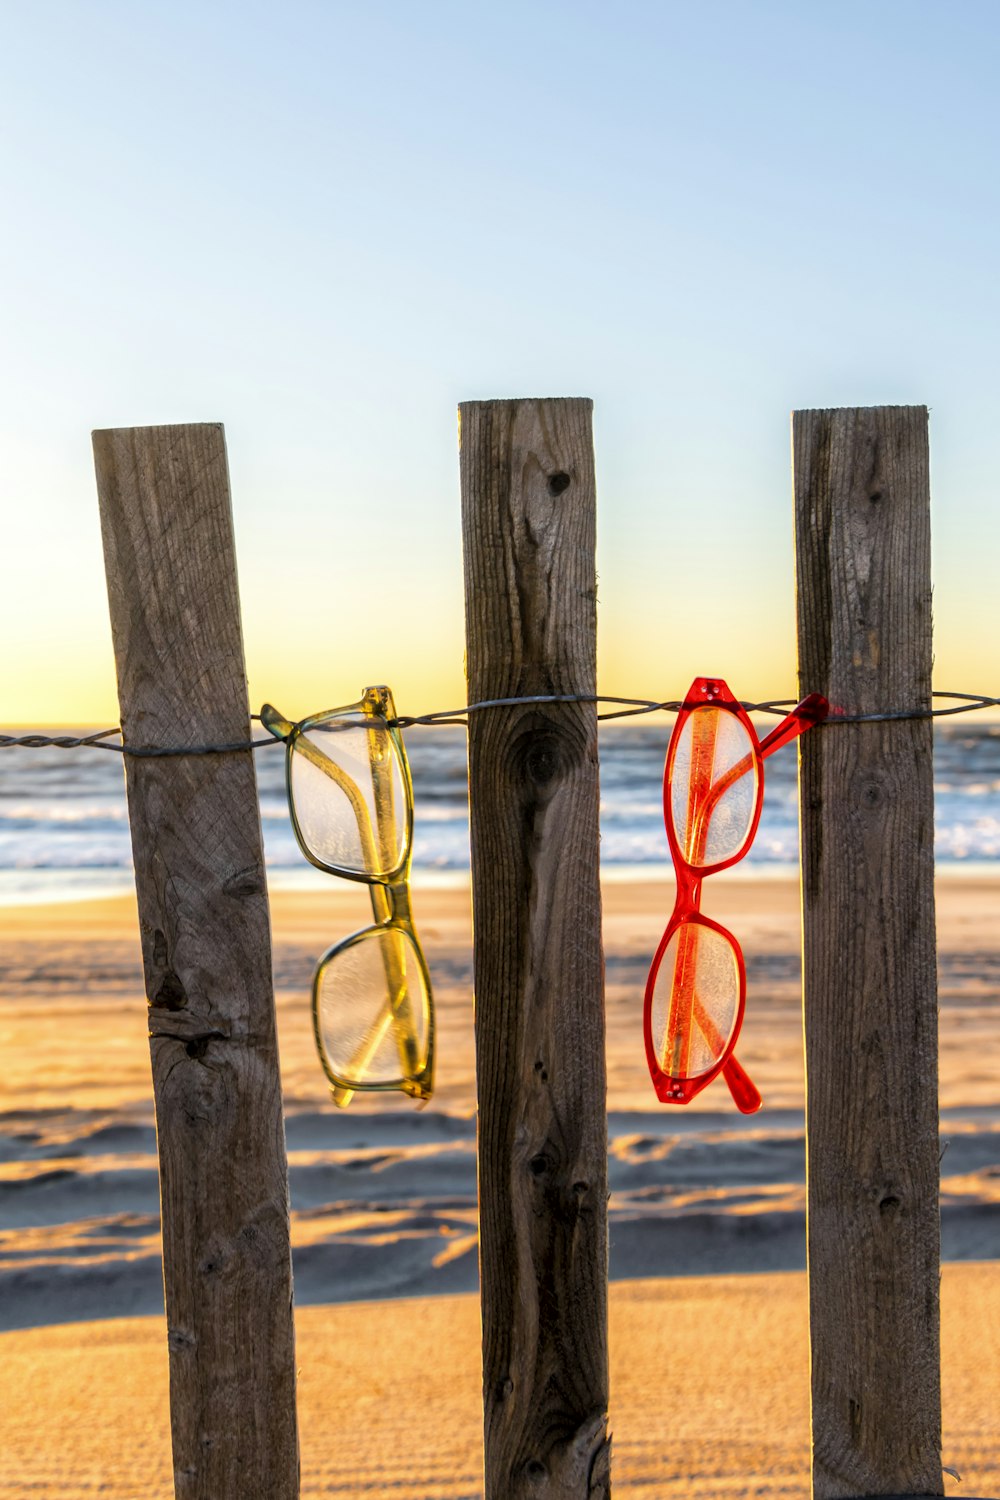 a pair of red glasses hanging on a wooden fence